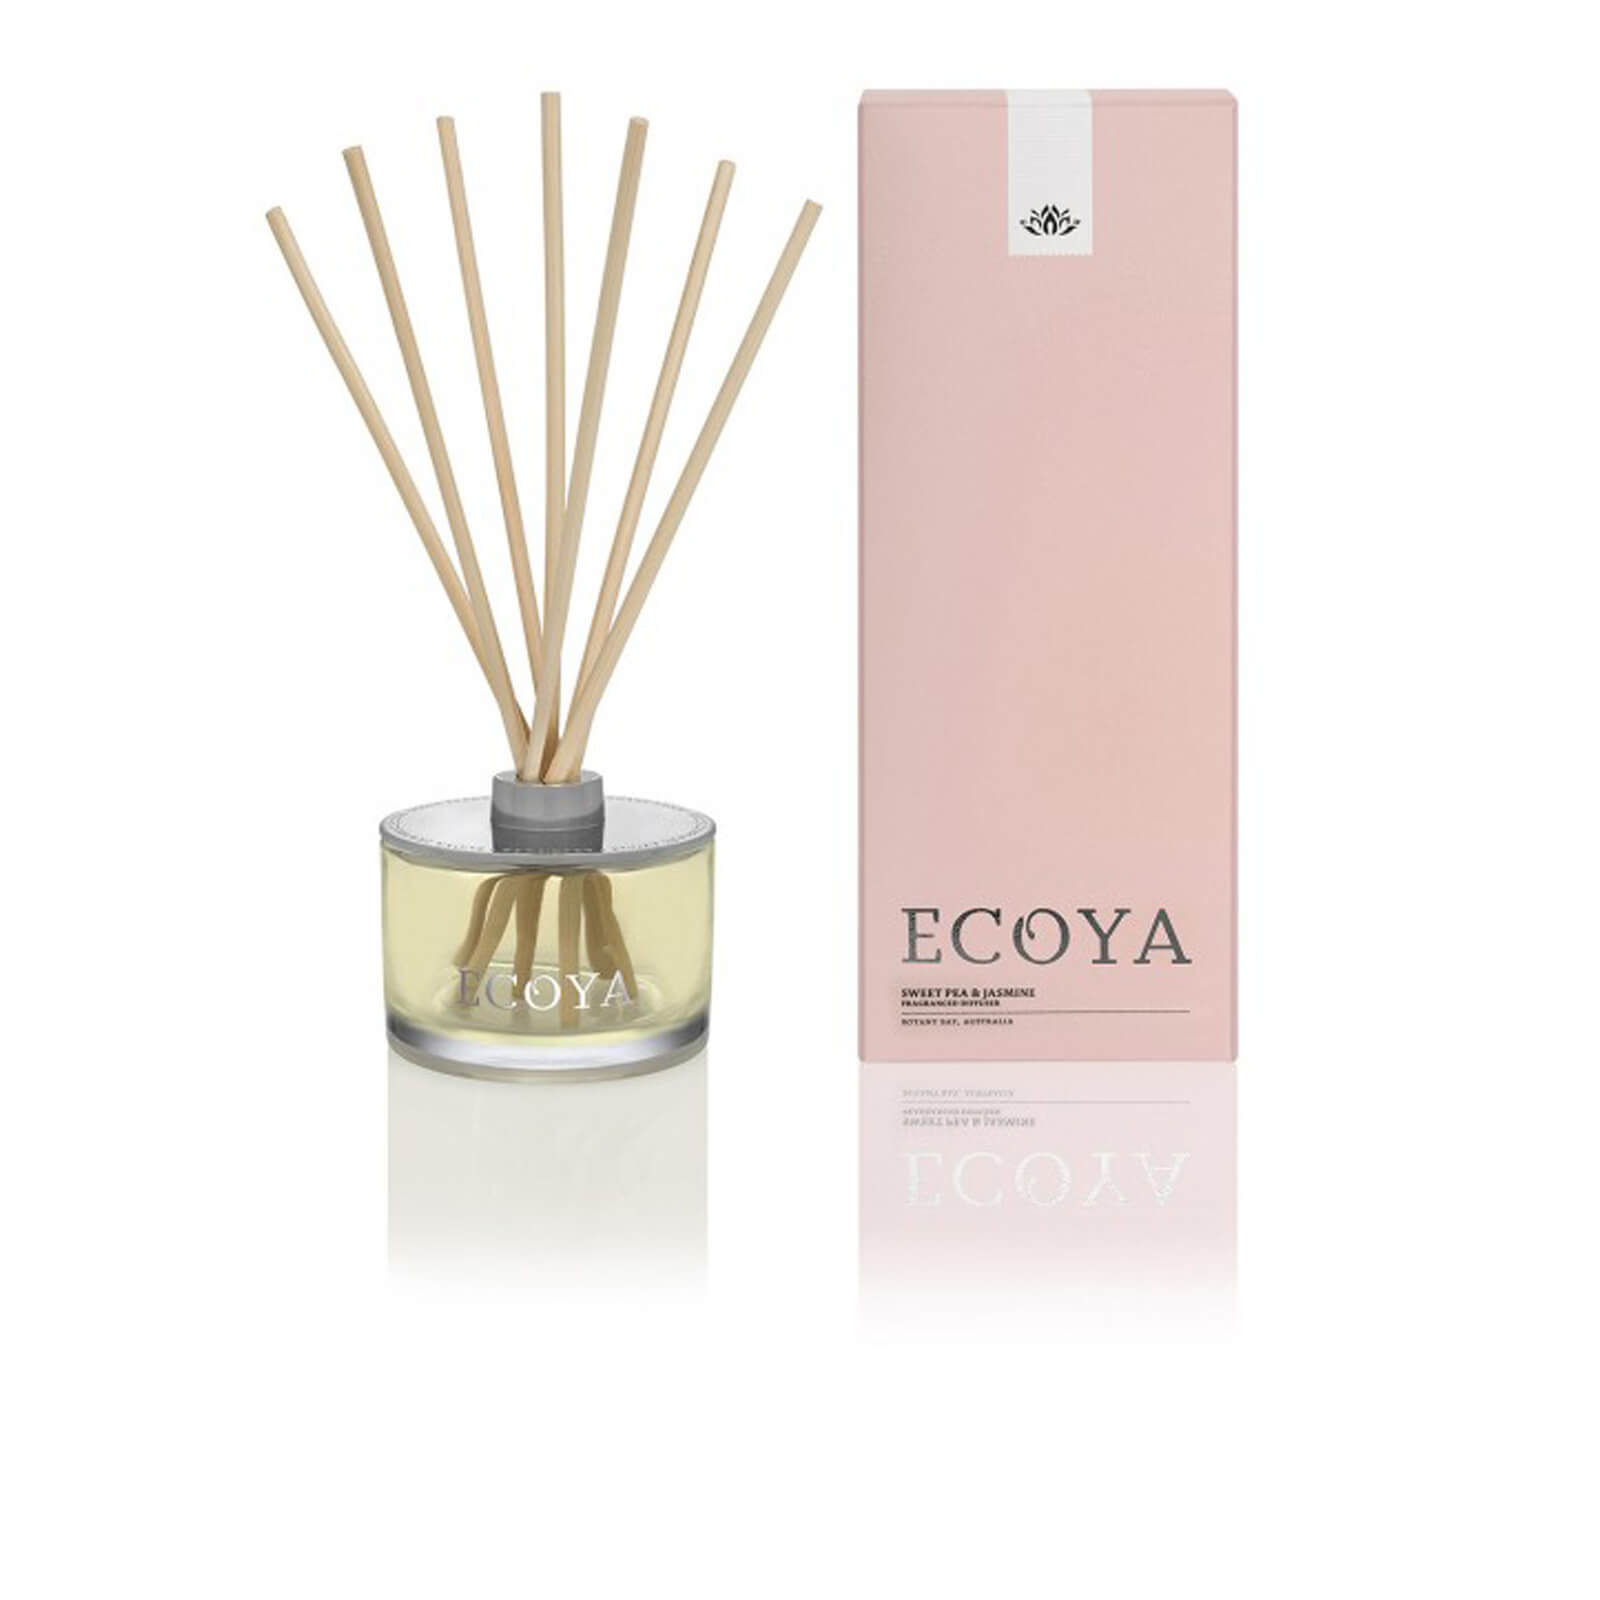 Details about   ECOYA-French Pear Scented Diffuser 